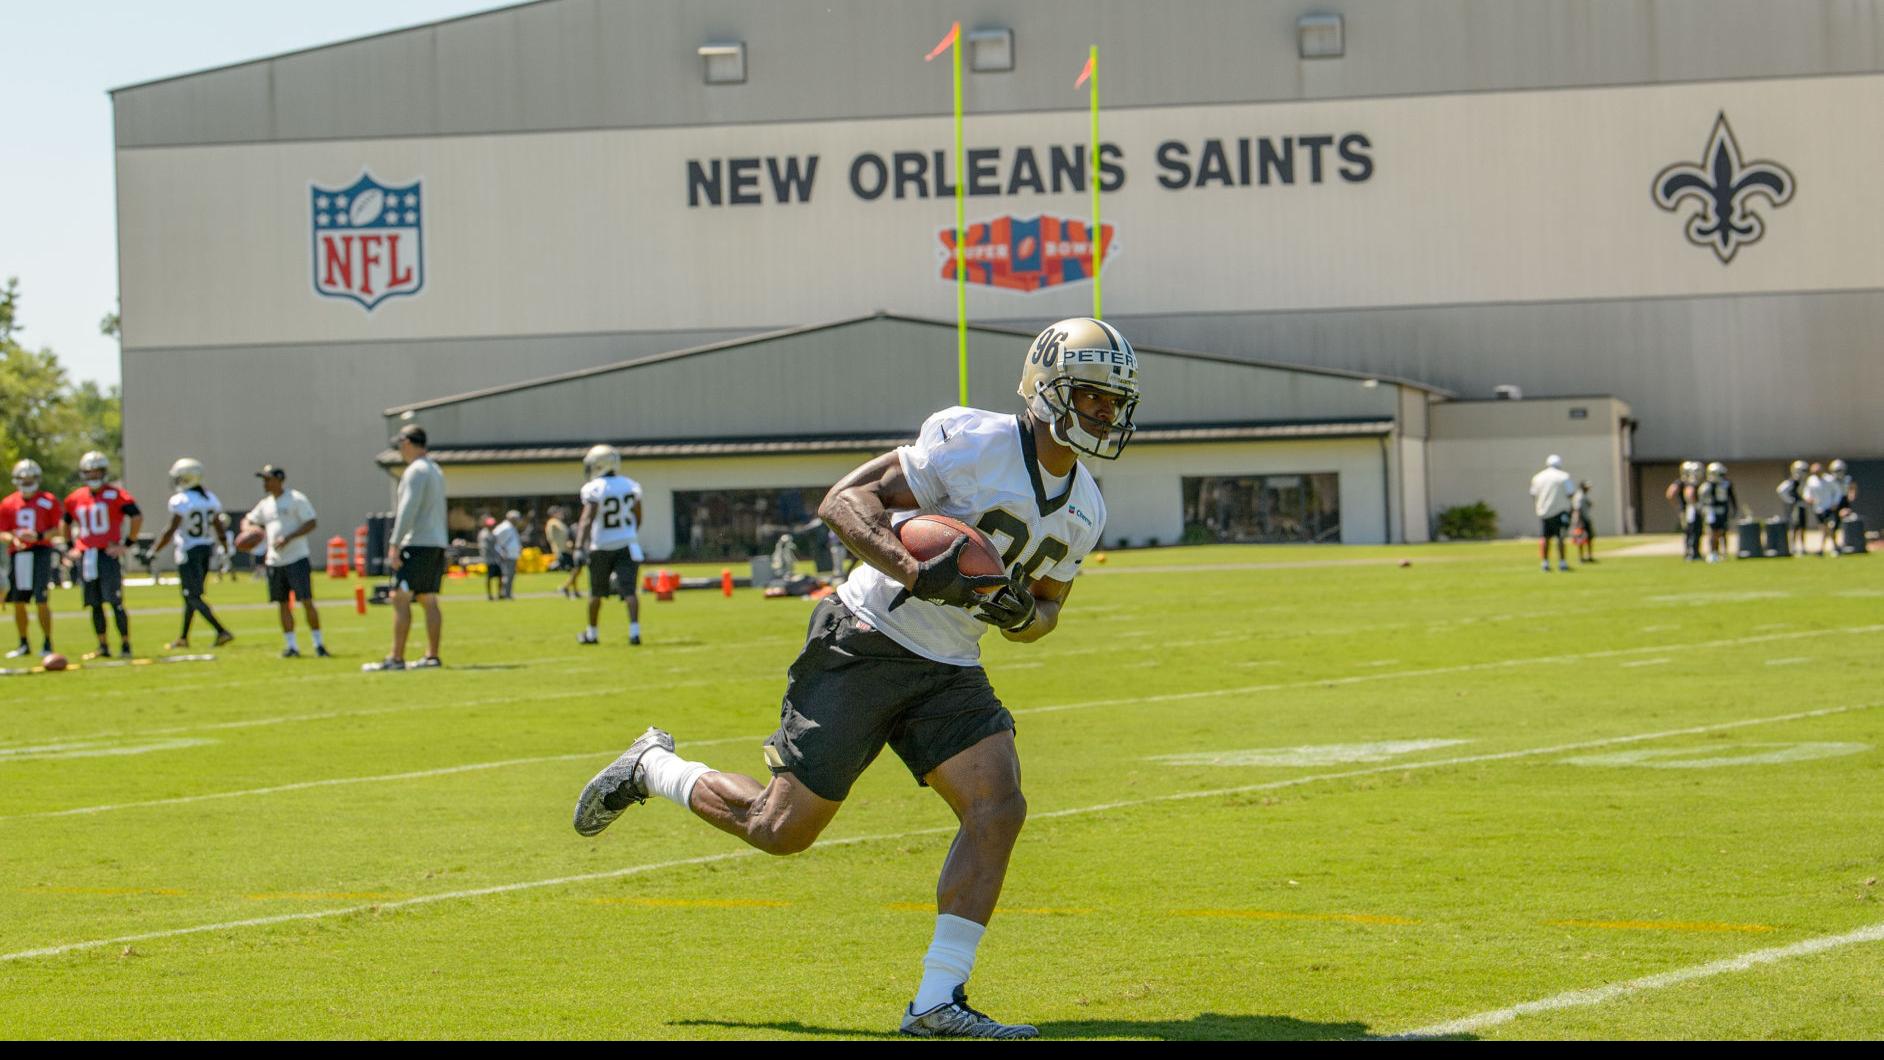 Ochsner buys naming rights for New Orleans Saints' and Pelicans